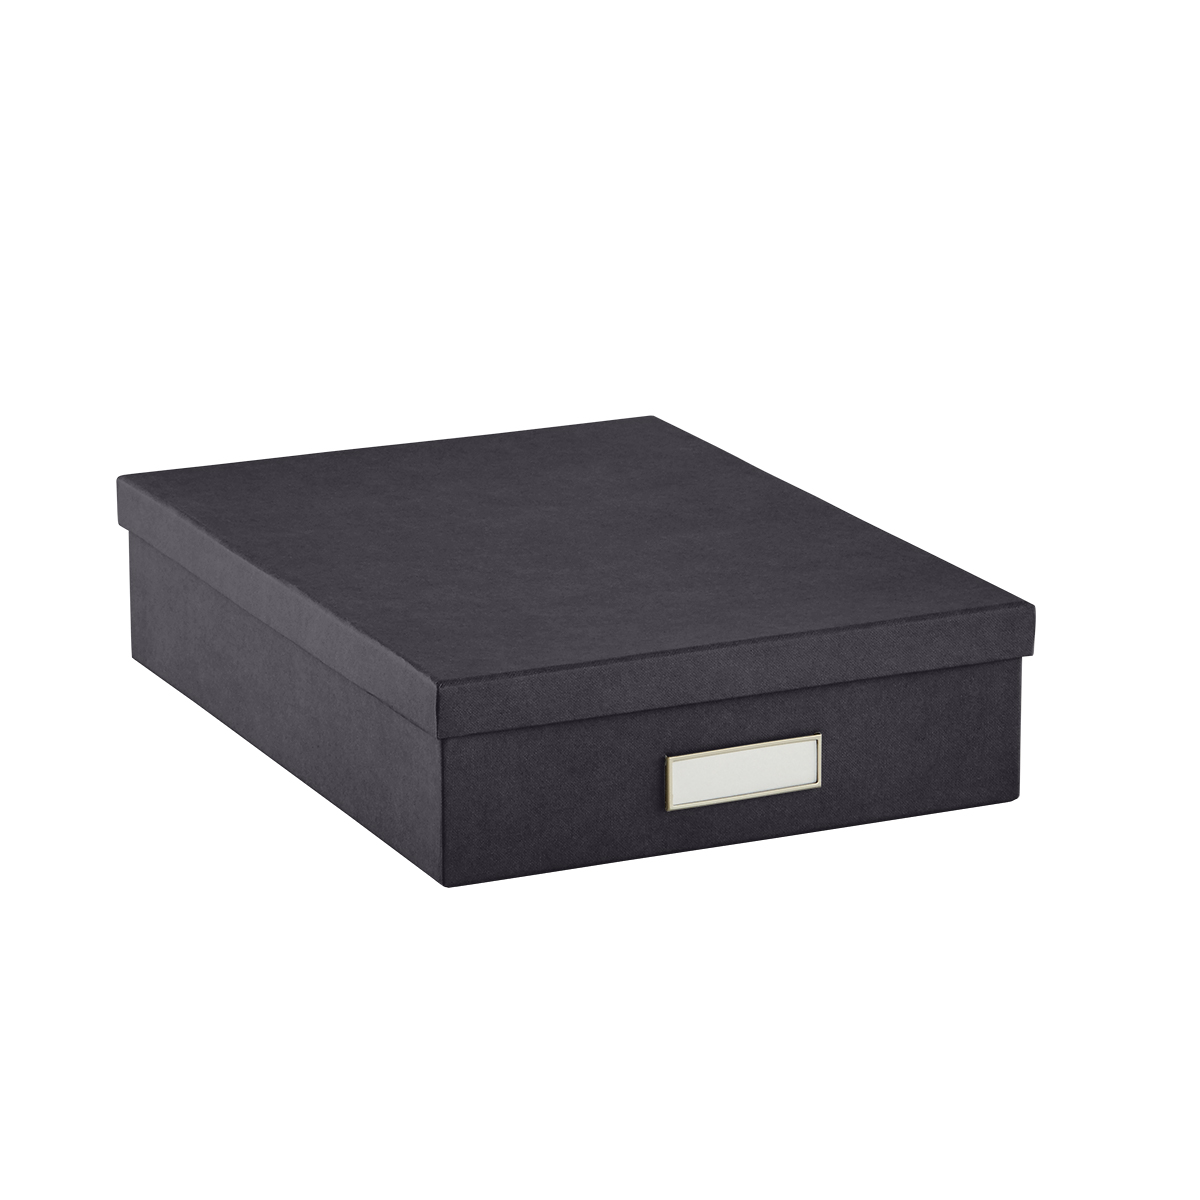 Small Storage by Bigso Box of Sweden − Now: Shop at $18.45+